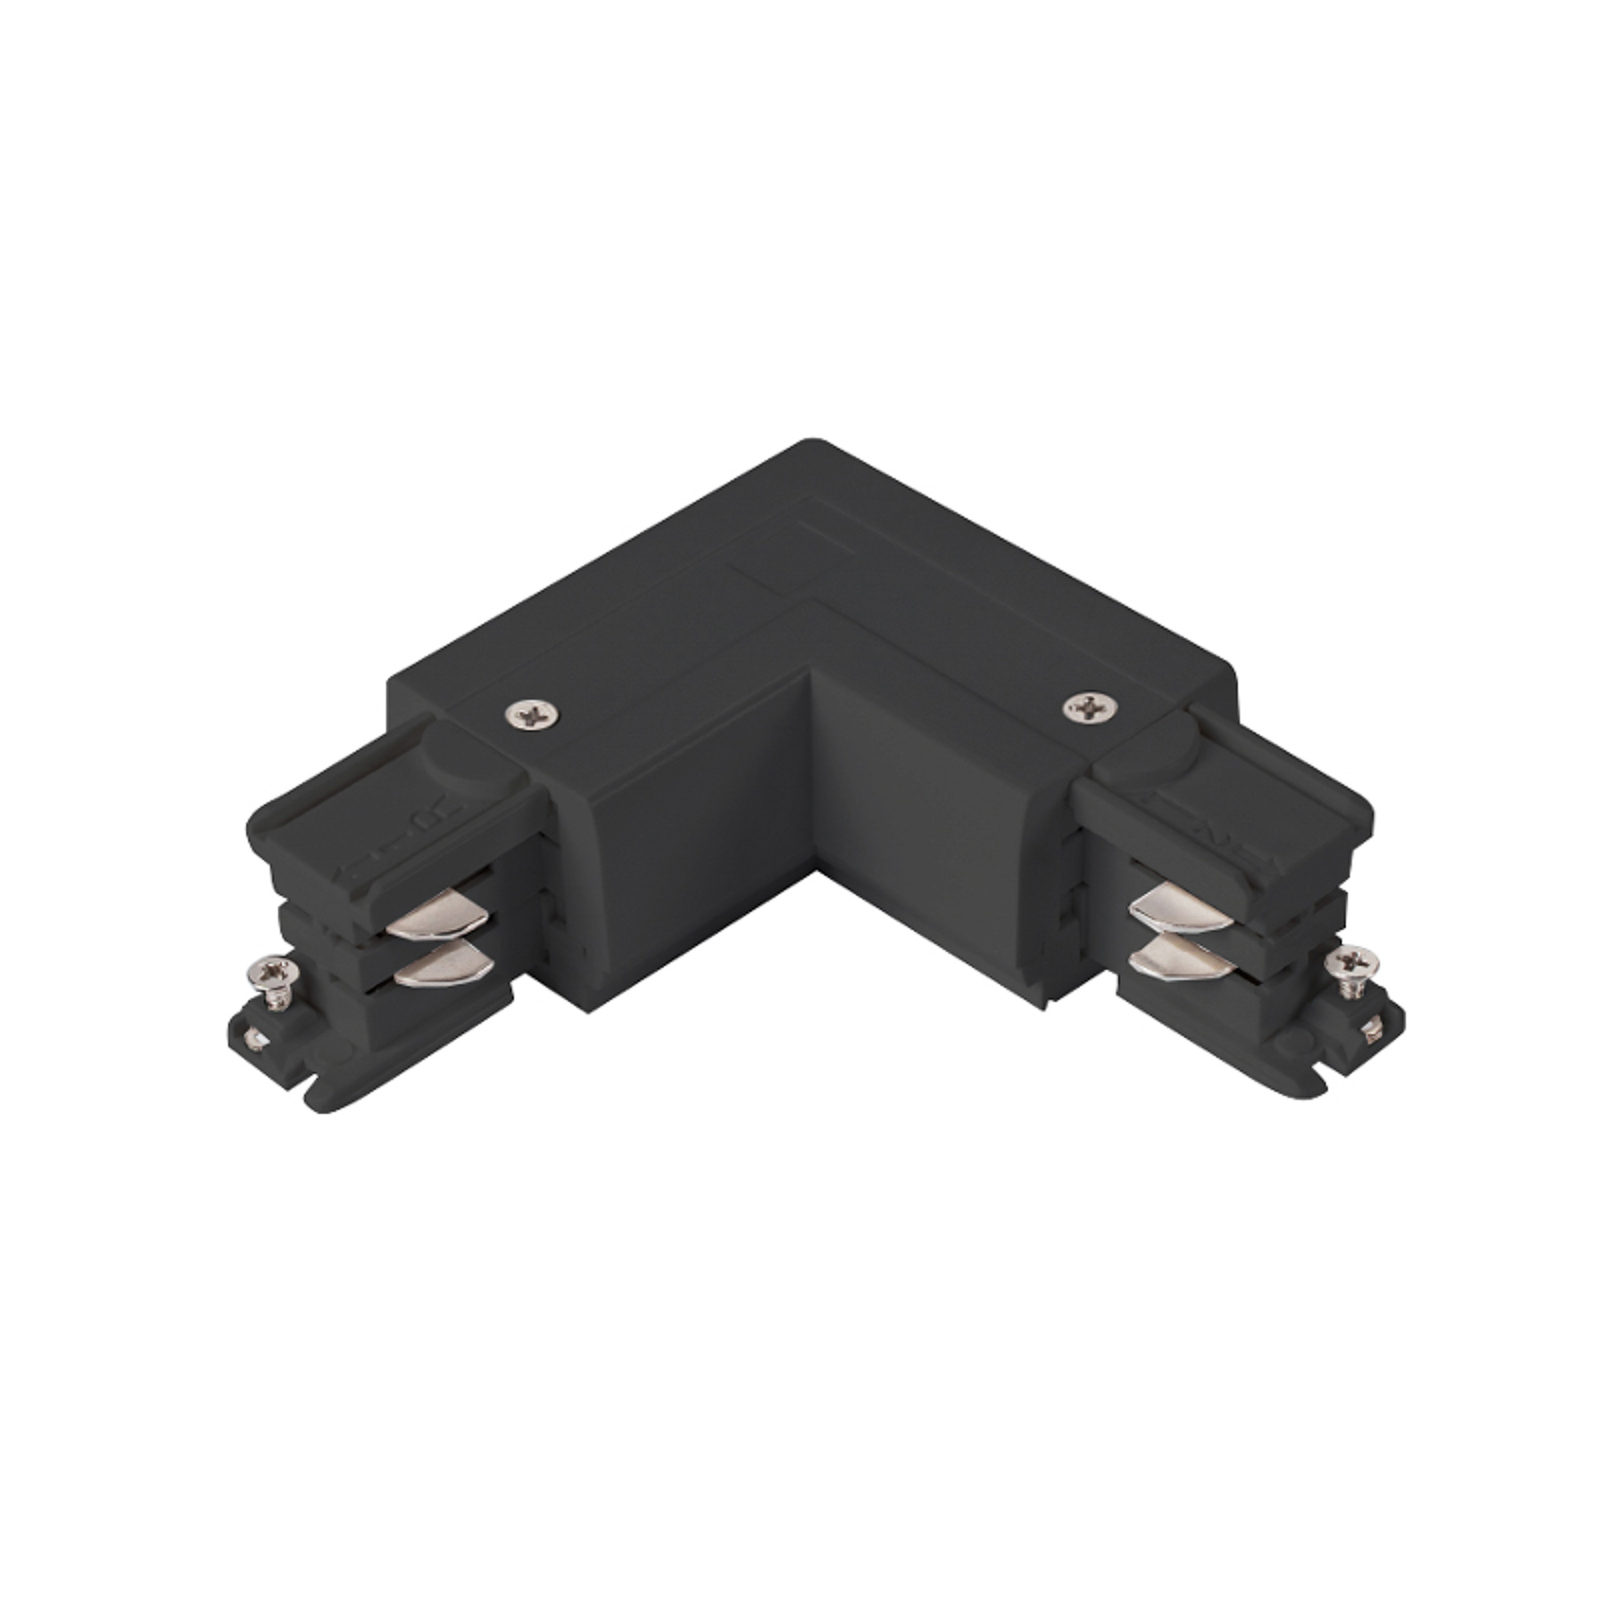 Arcchio L-connector, 3-phase, earth outside, black